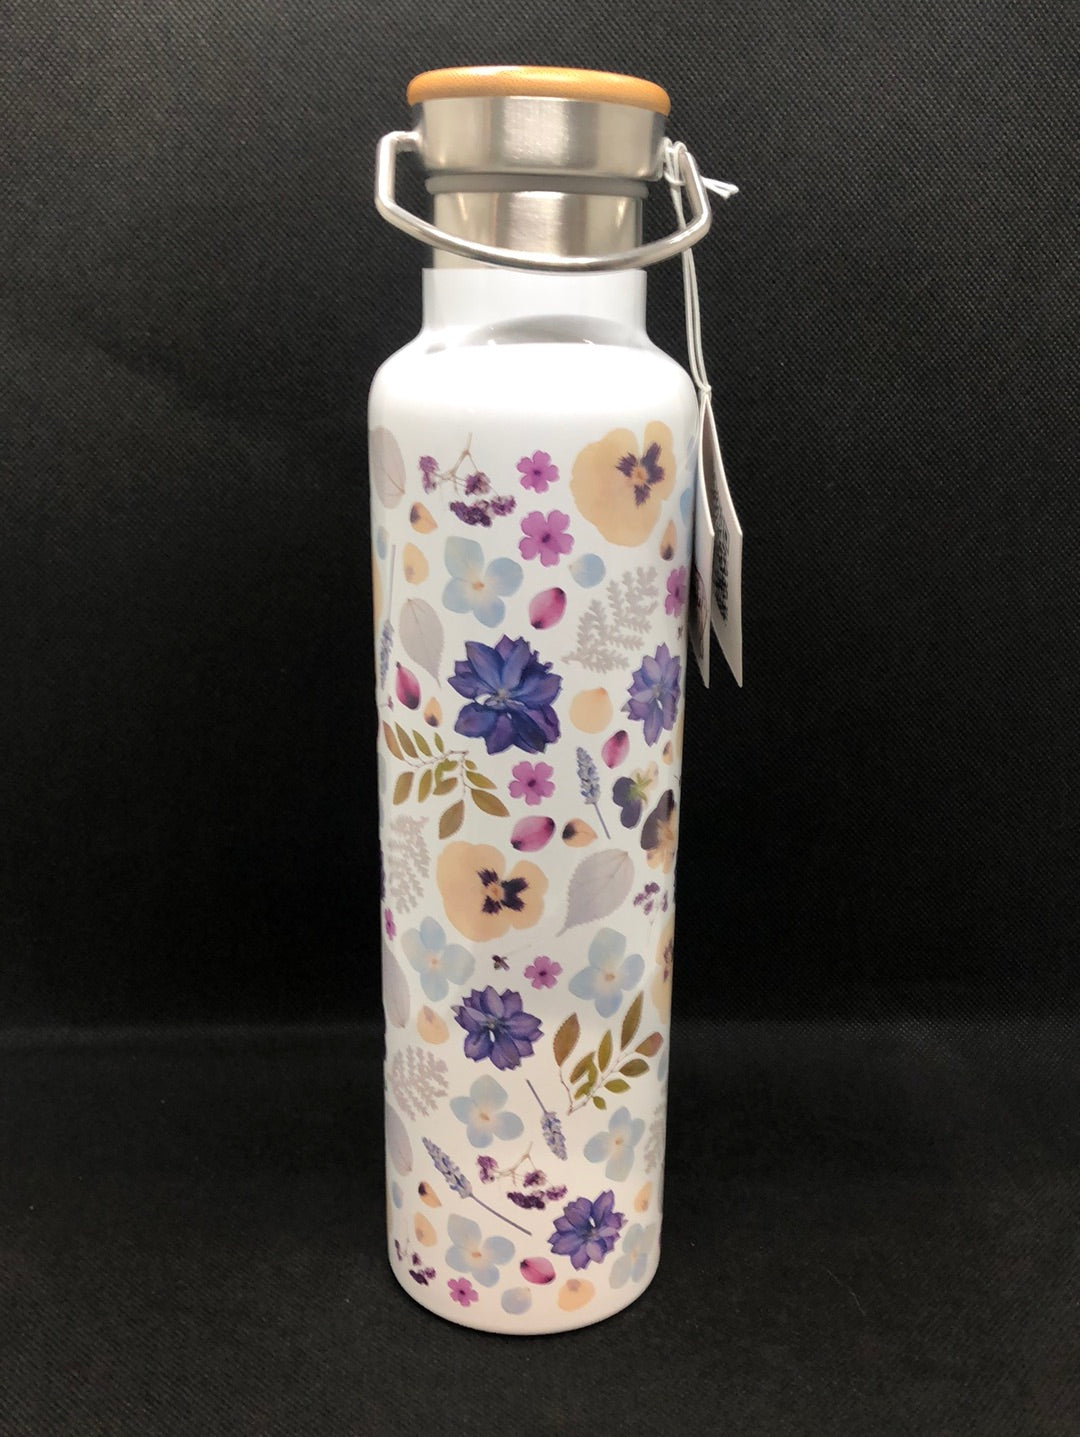 water bottle with stainless steel and insulated -flowers design - full view